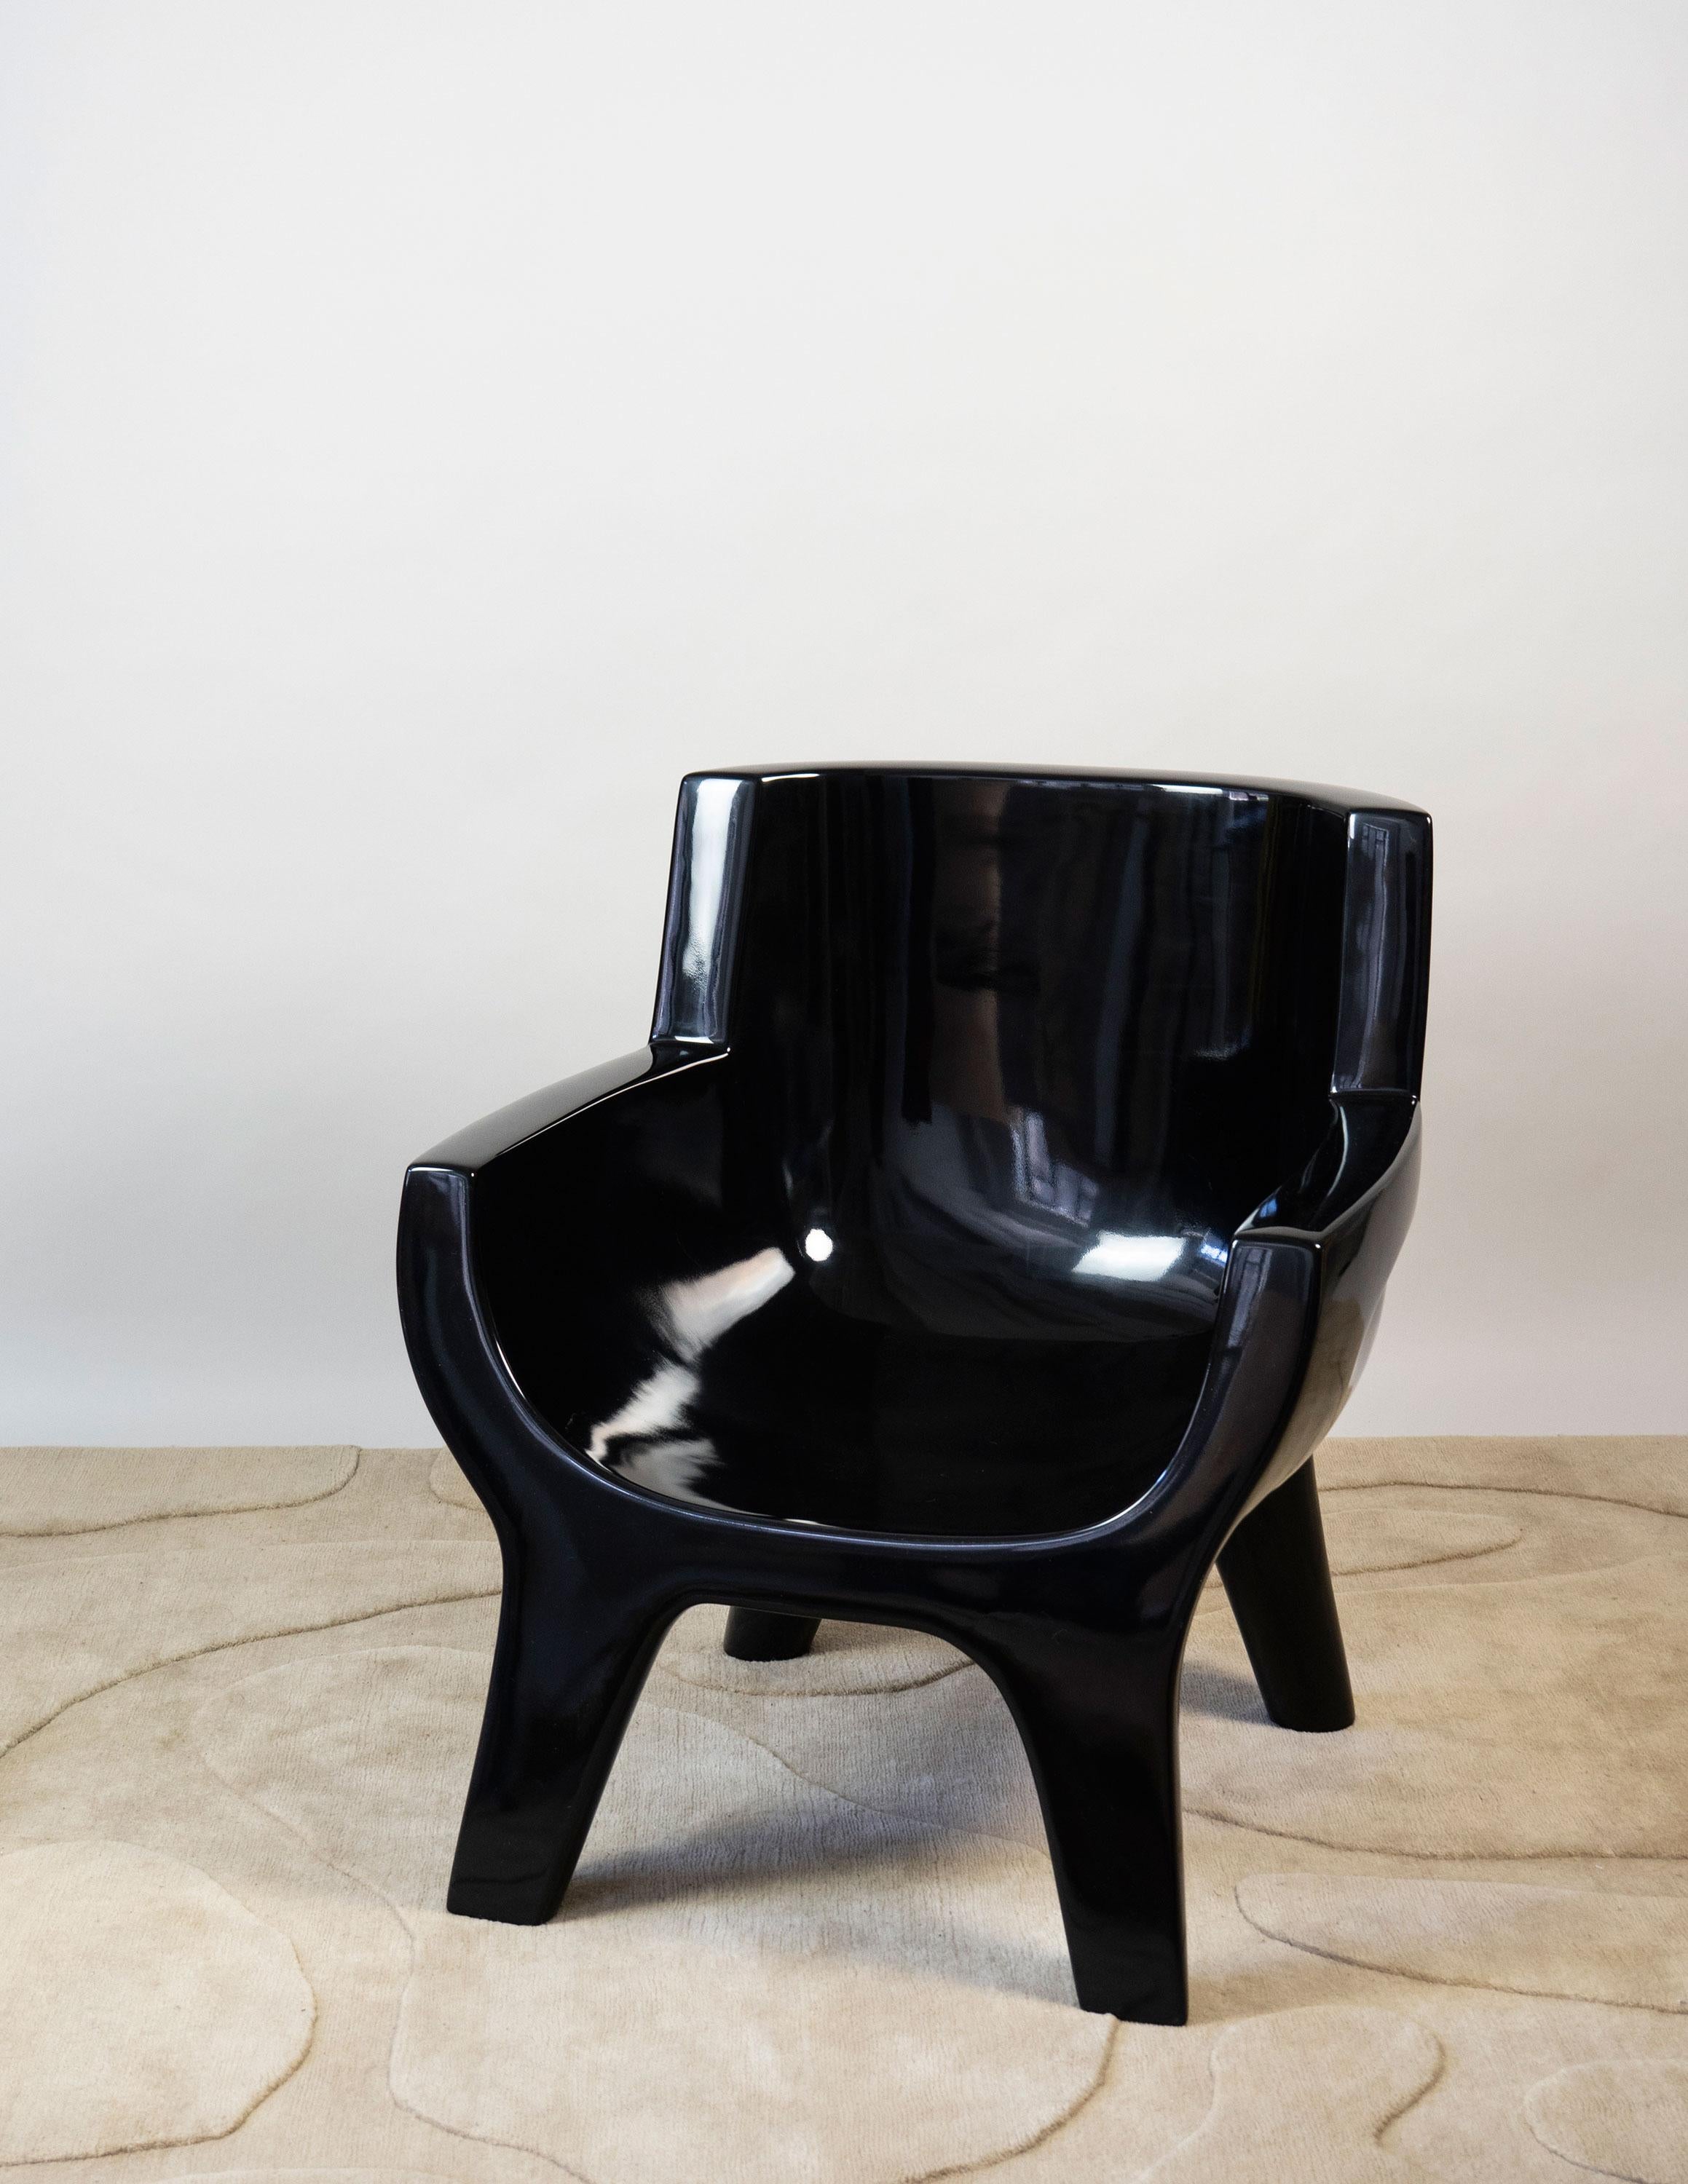 Sculpture / armchair carved by hand with two handles on each side. Comfortable and very sturdy black lacquer.